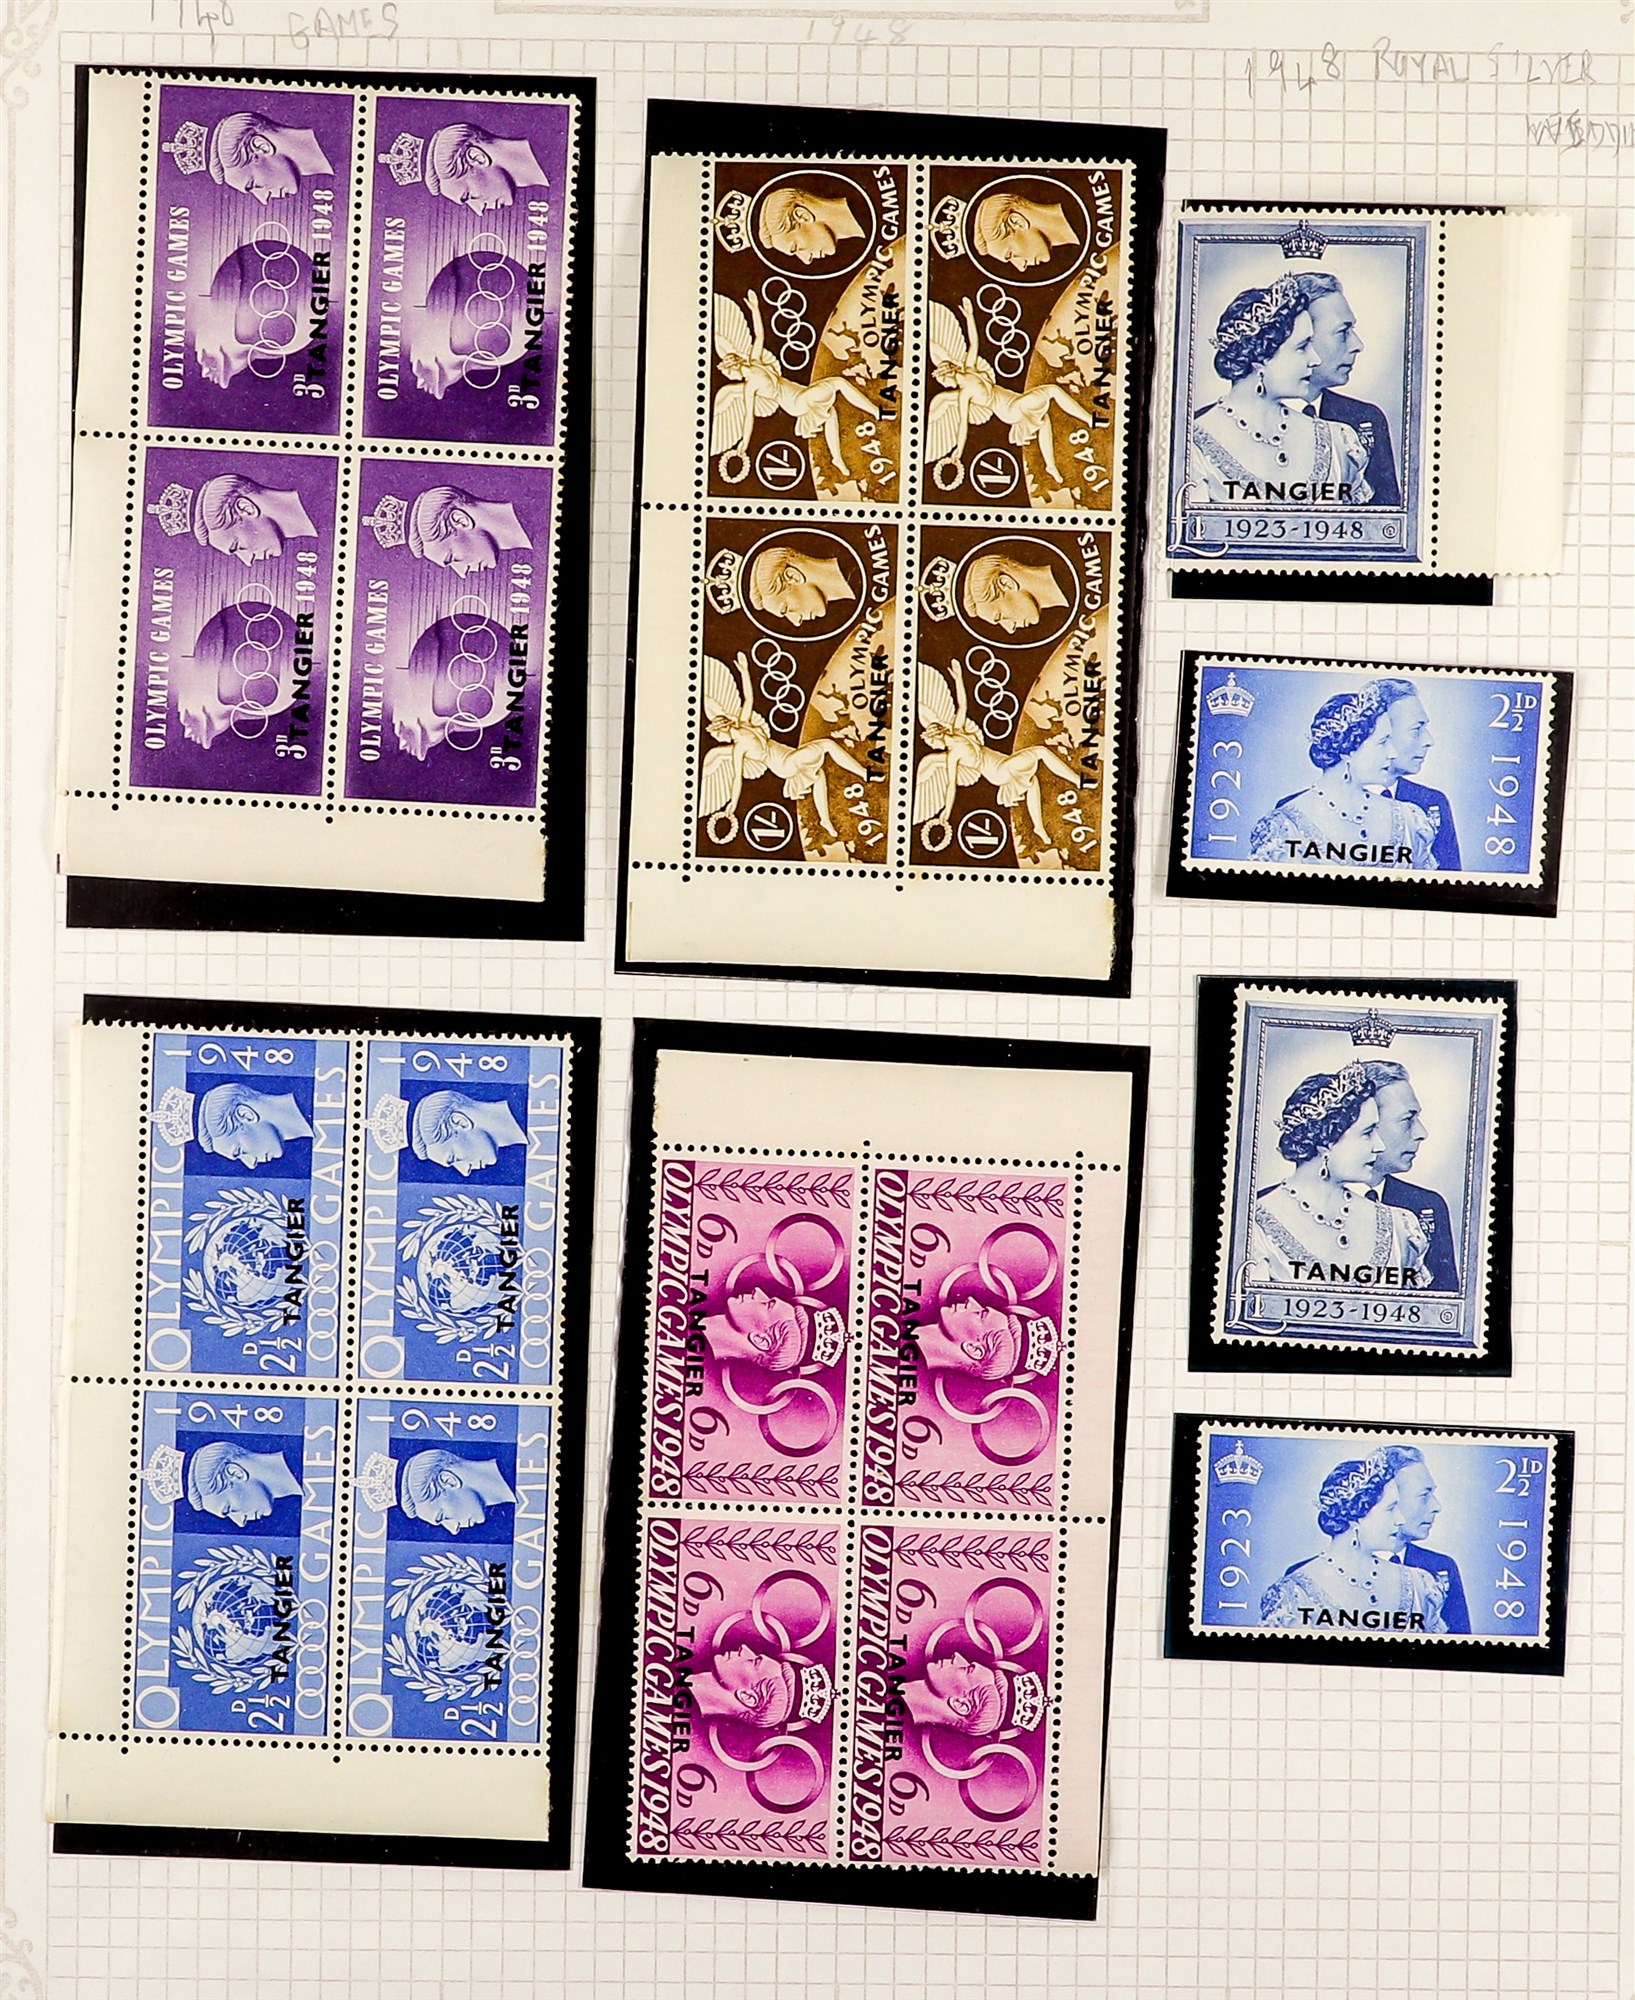 MOROCCO AGENCIES TANGIER 1927 - 1957 collection of mint and never hinged mint stamps, many sets, - Image 2 of 6